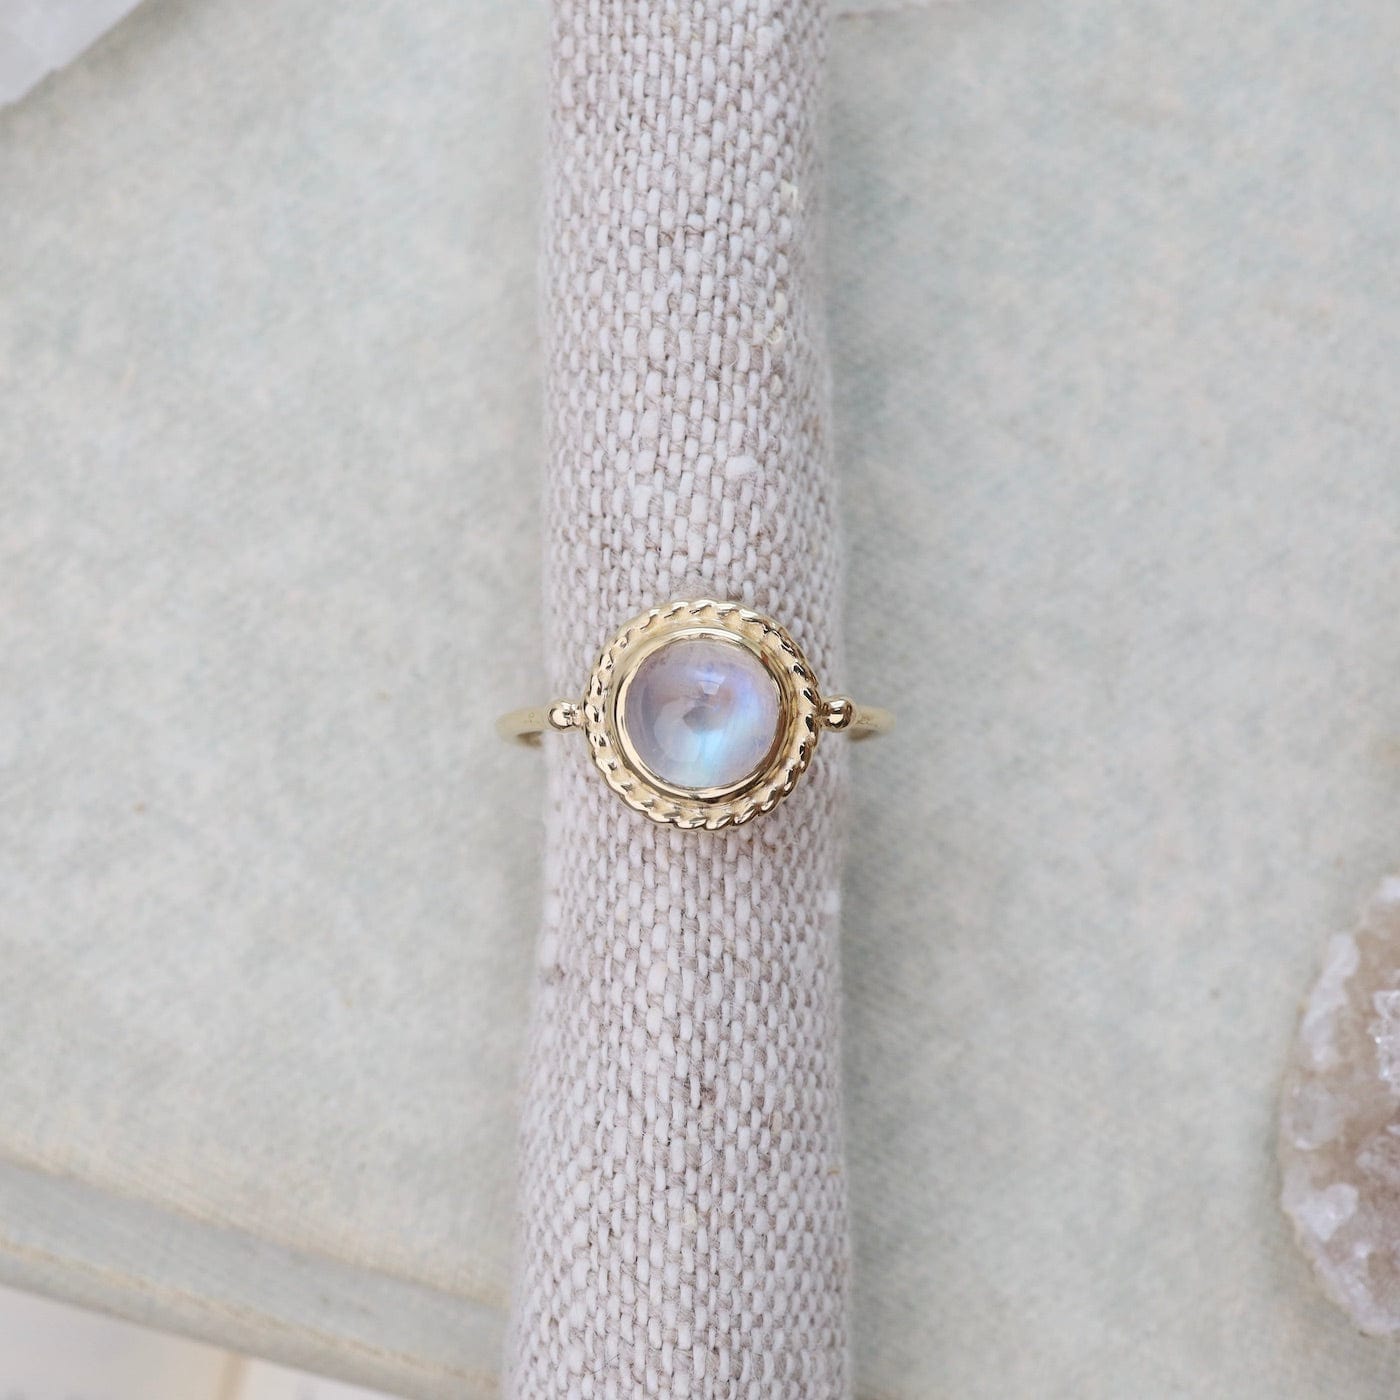 RNG-14K Gold Antiquarian Ring with Moonstone